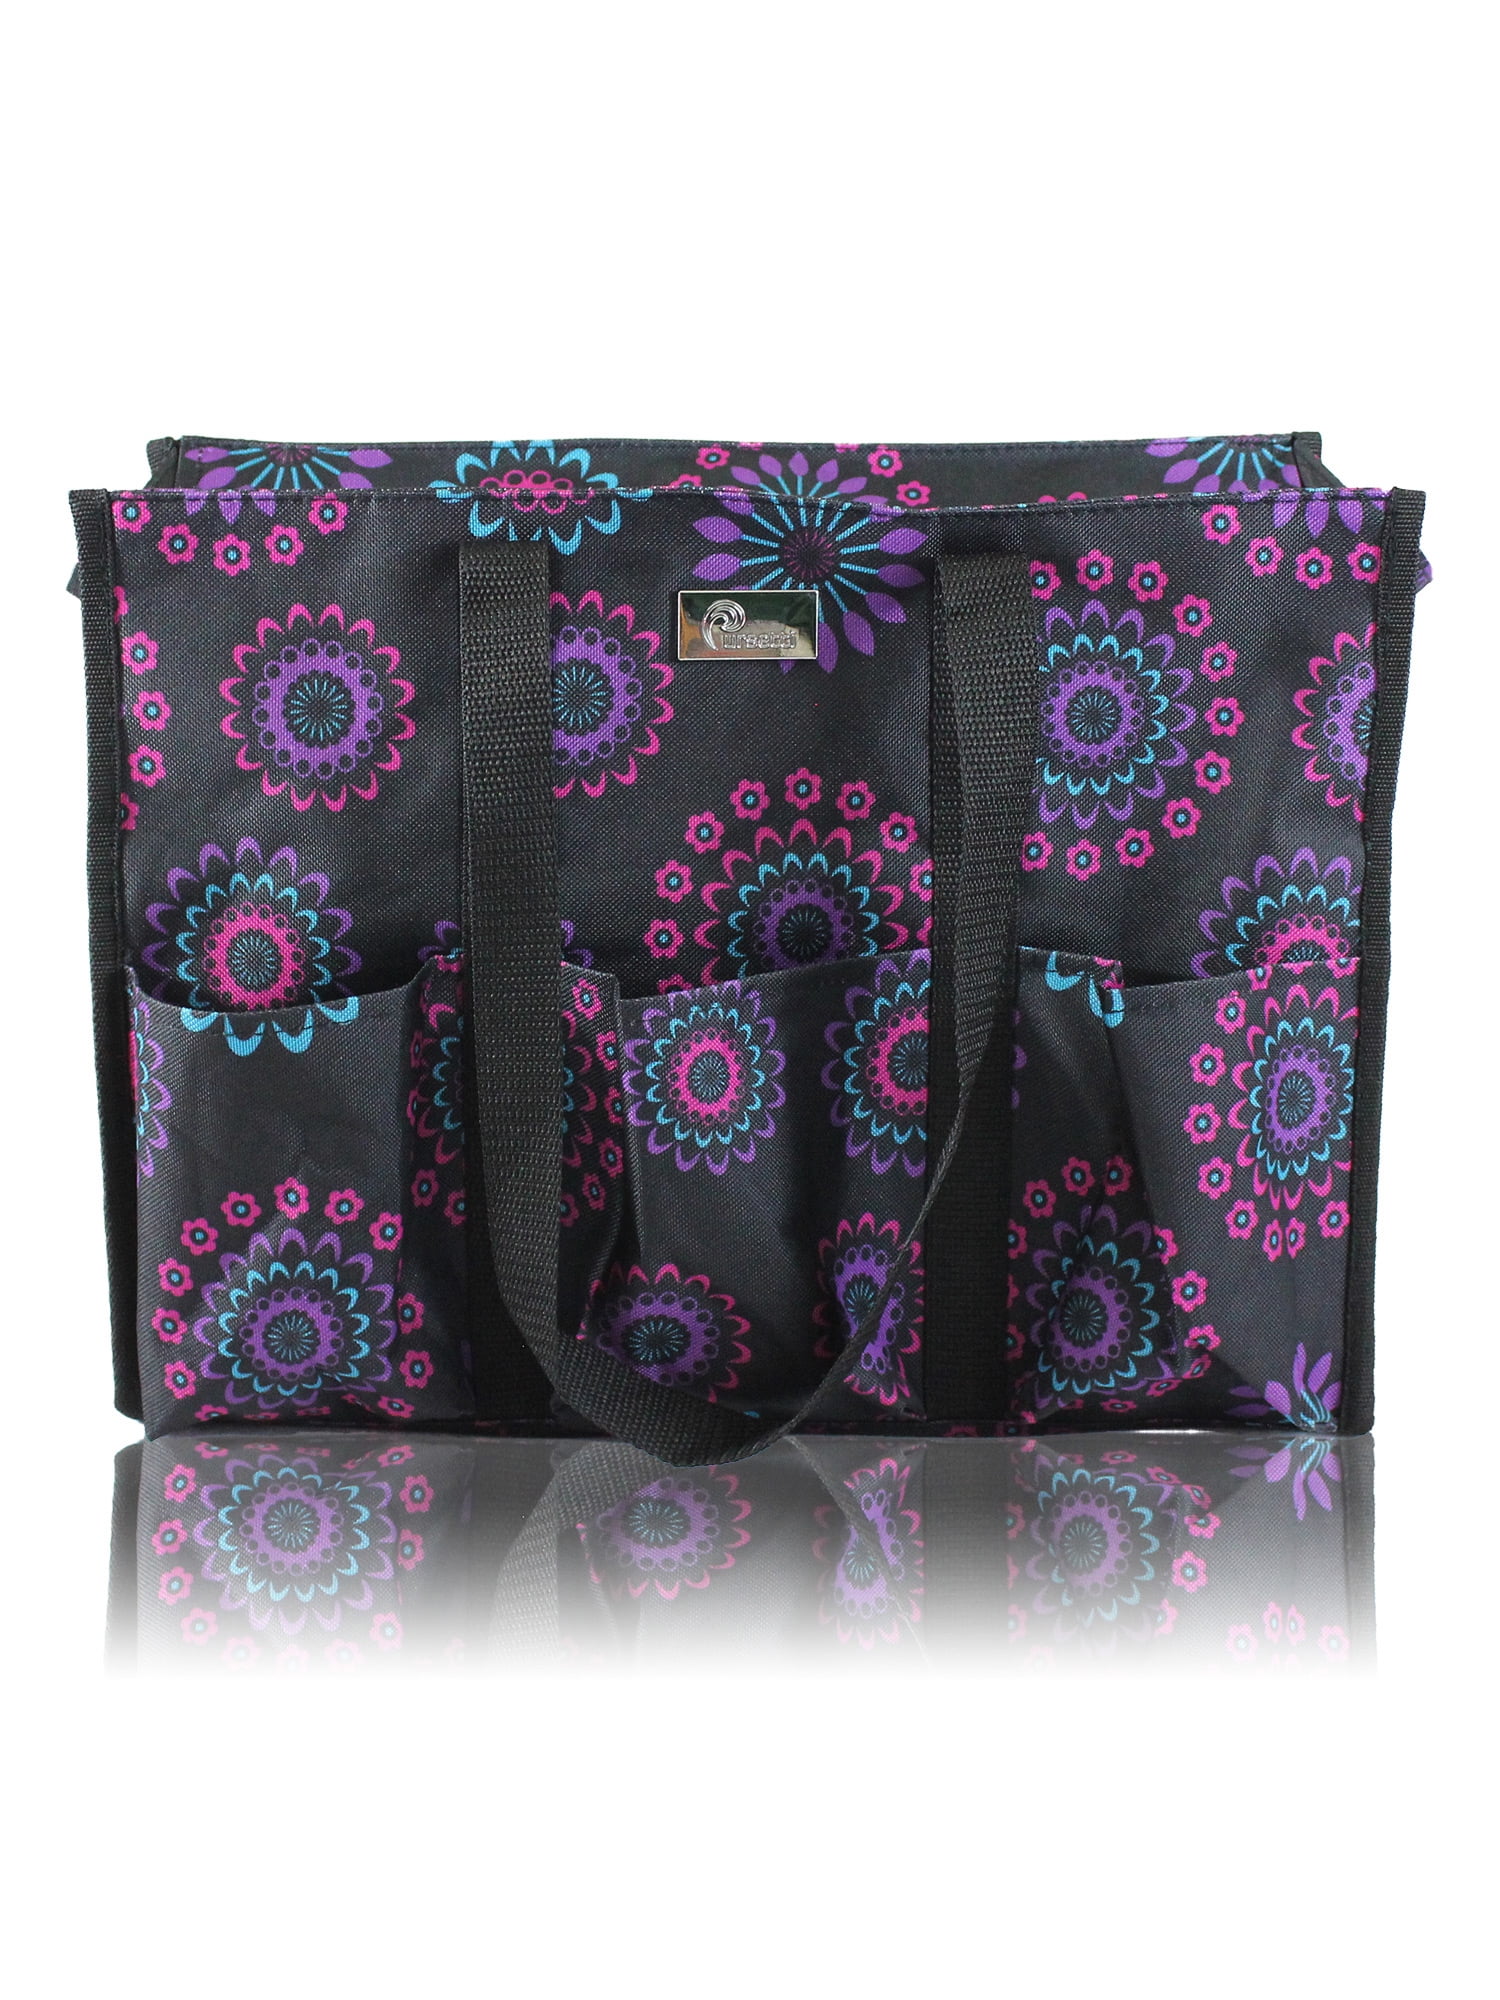 Teachers and Soccer Moms Nurses Pursetti Zip-Top Organizing Utility Tote Bag with Multiple Exterior & Interior Pockets for Working Women Black Daisy